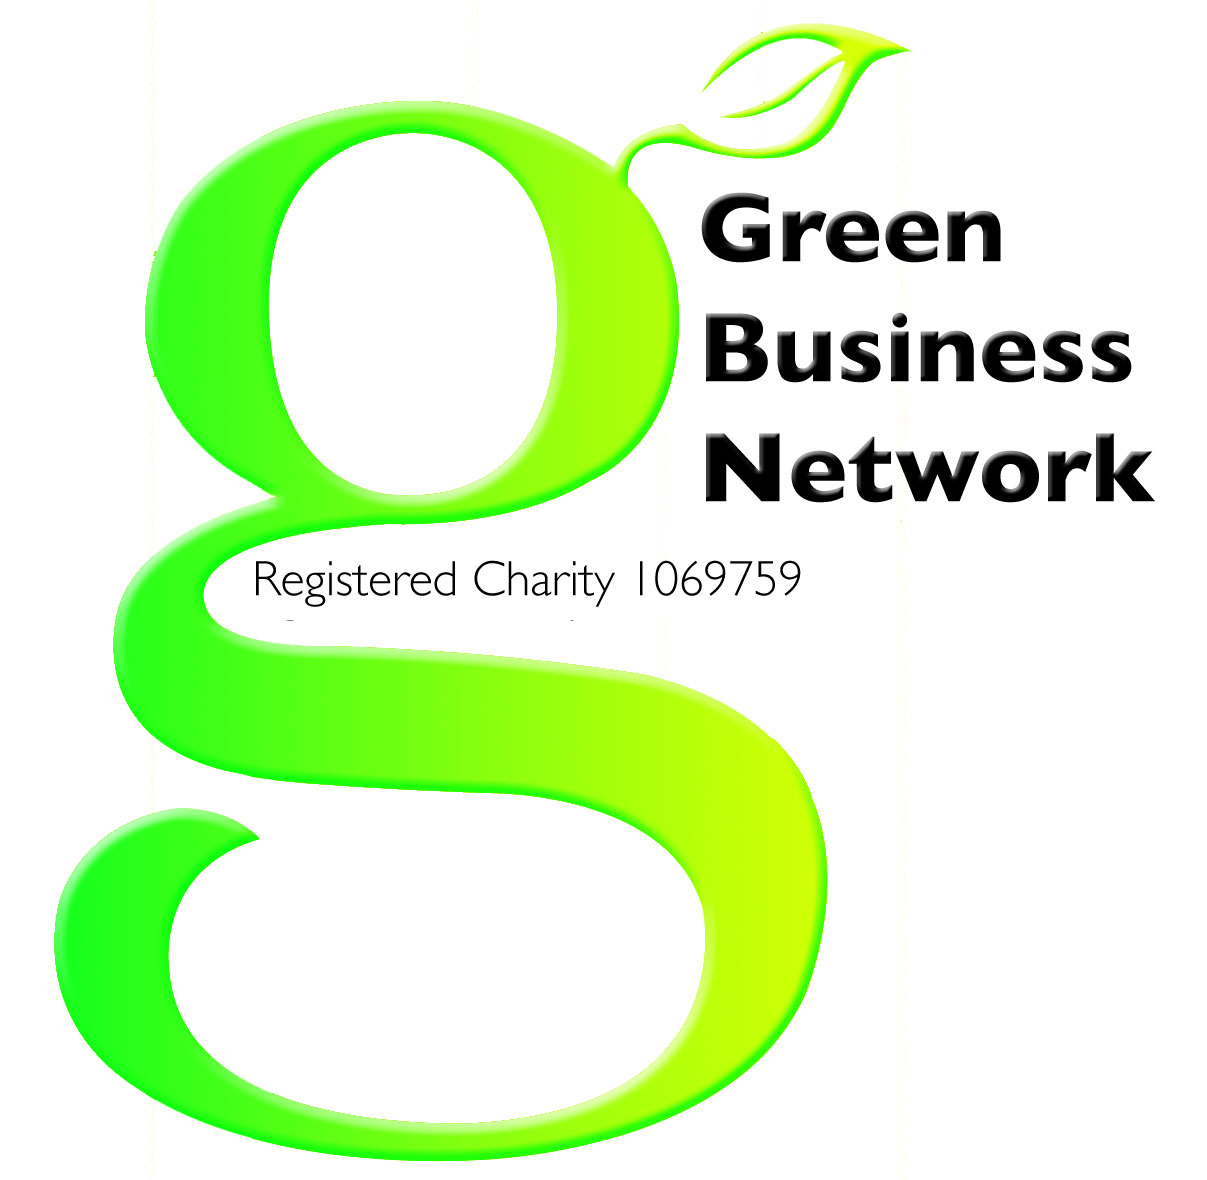 New programme to help local businesses embrace sustainability